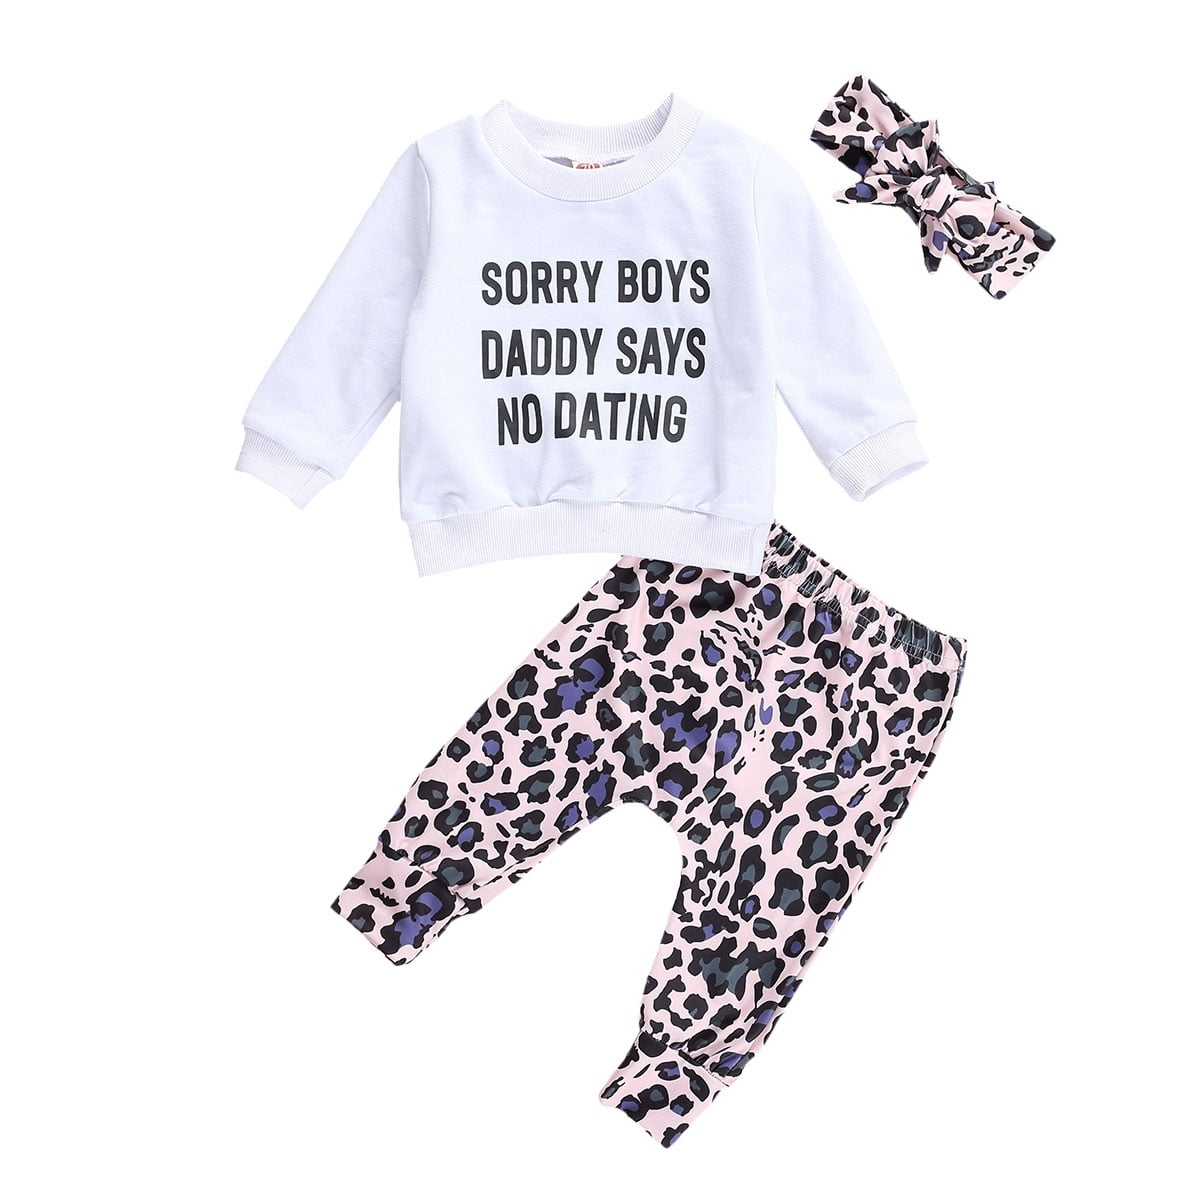 Baby Girl Clothes Toddler Outfits Sets Long Sleeve Top Leopard Tshirt Blue Pants Headband 3PCS 6Months-2T 